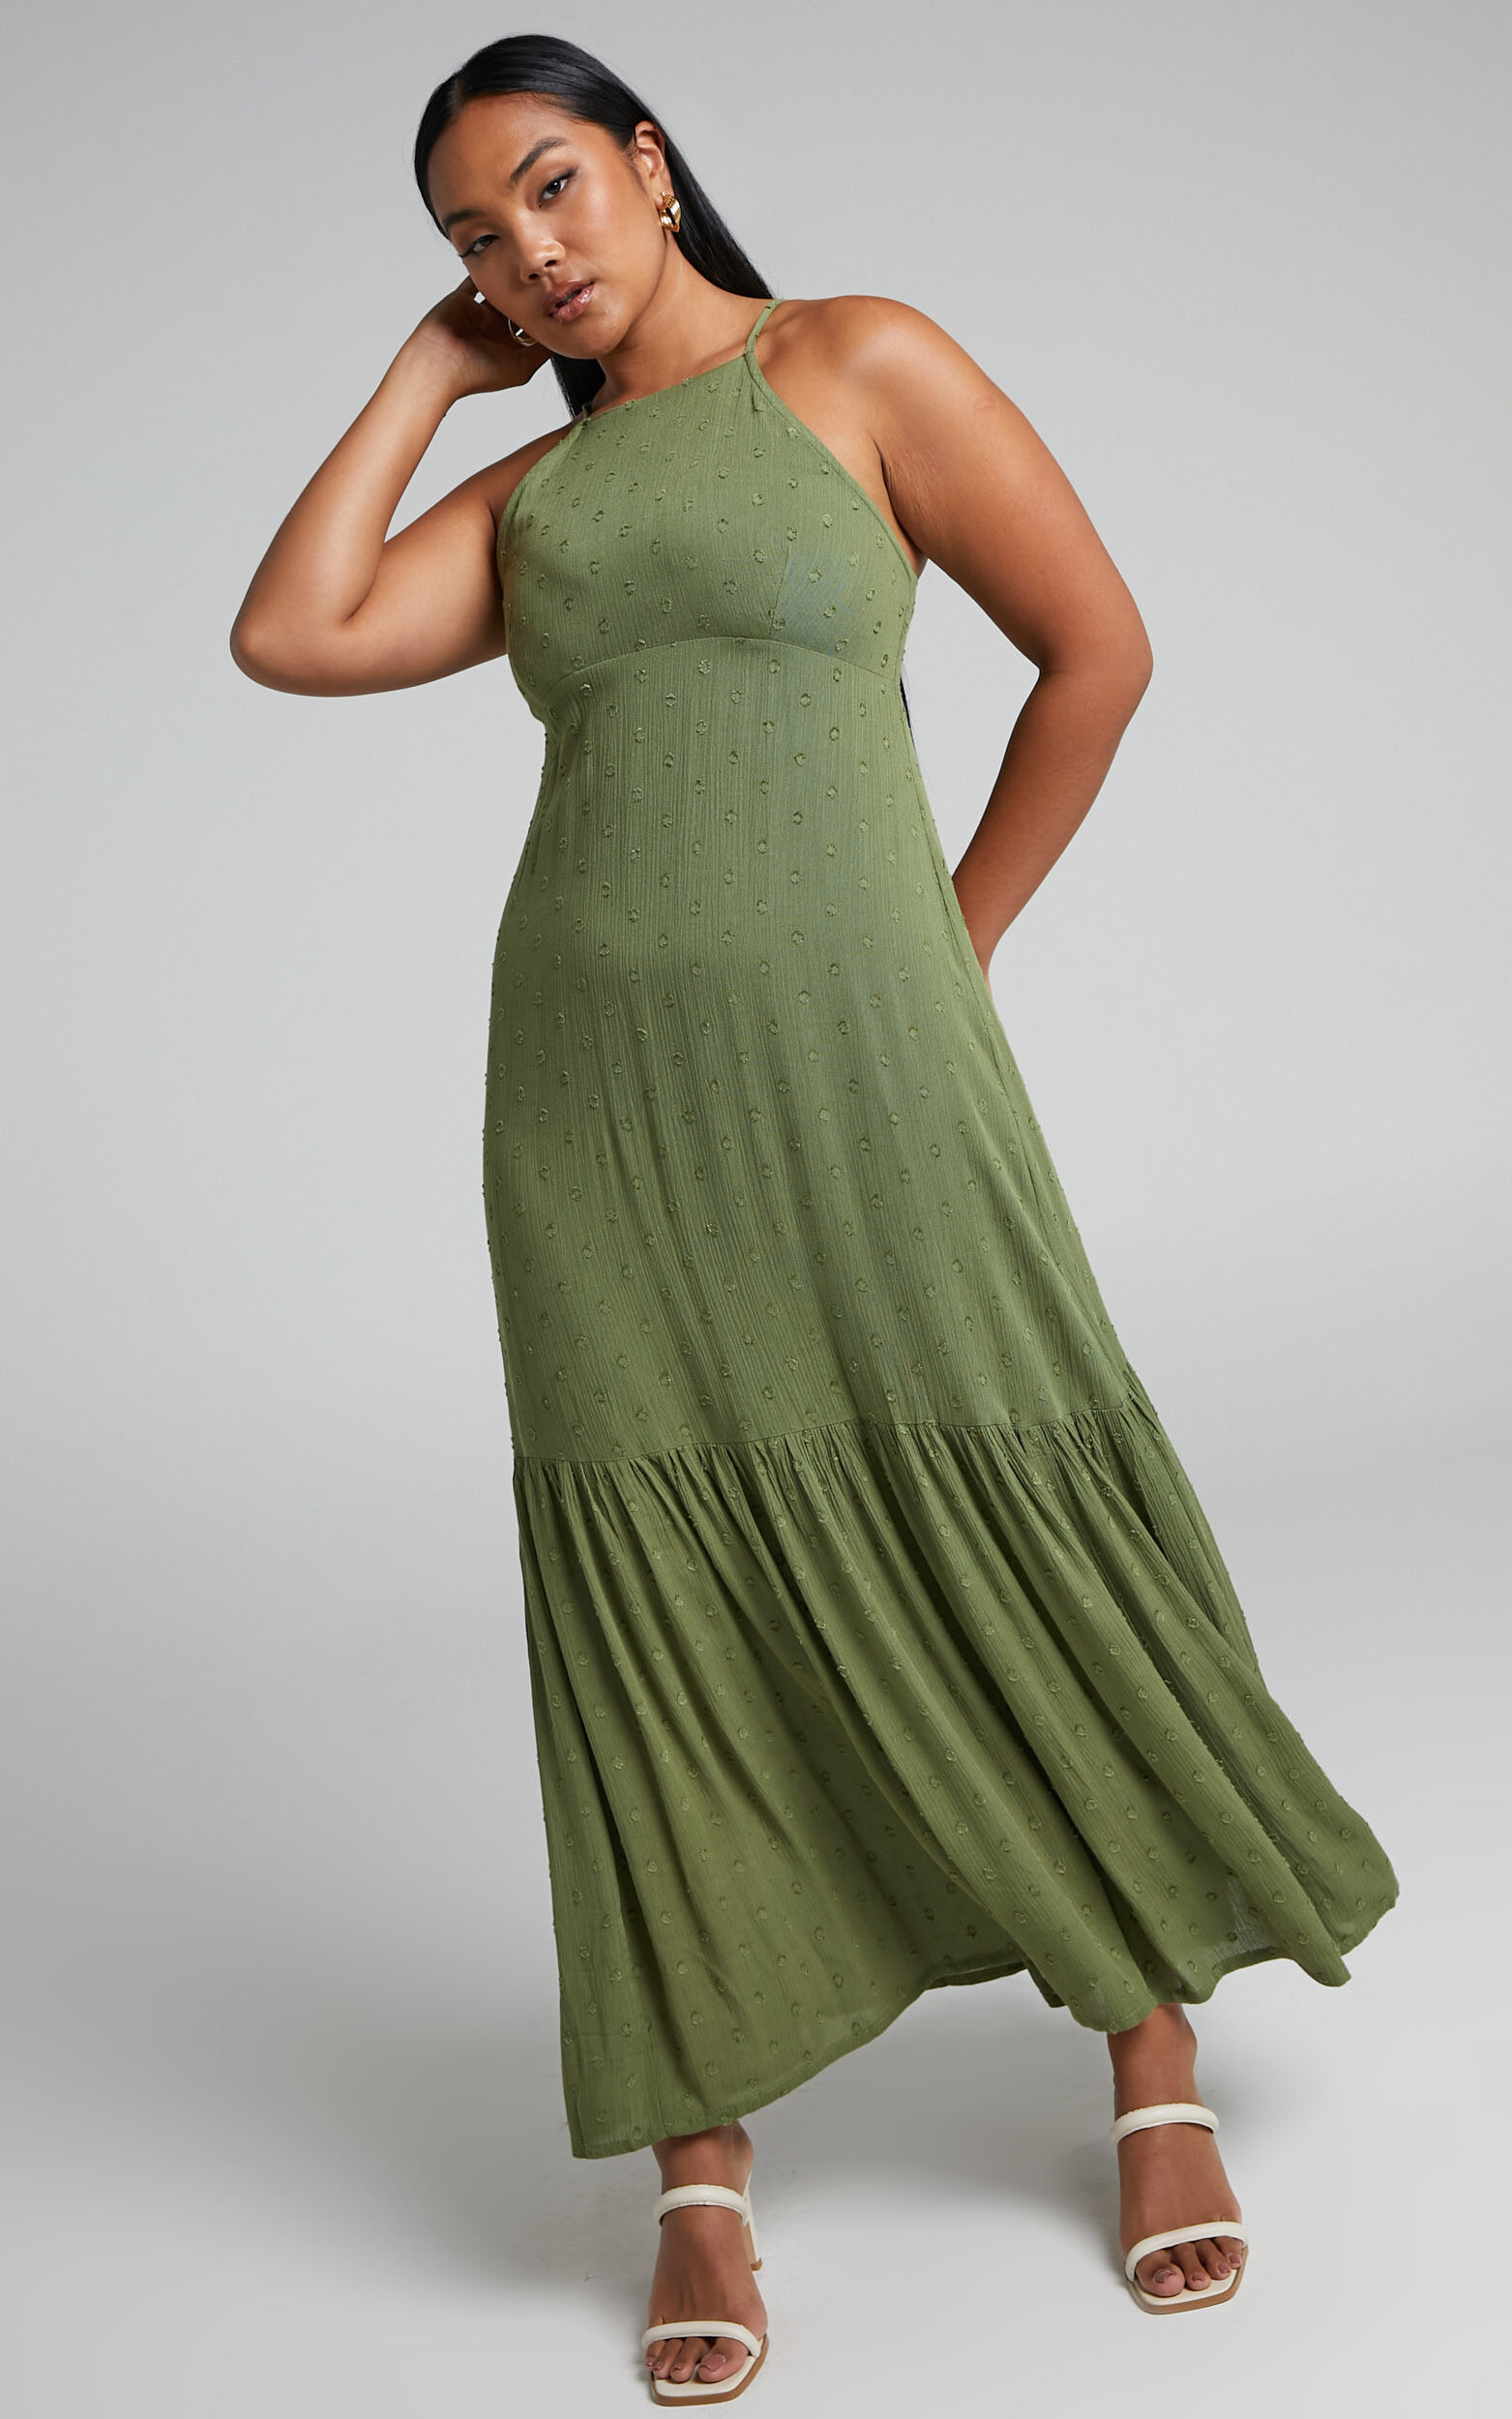 Cariele Strappy Tiered Dotted Maxi Dress in Olive - 06, GRN1, super-hi-res image number null